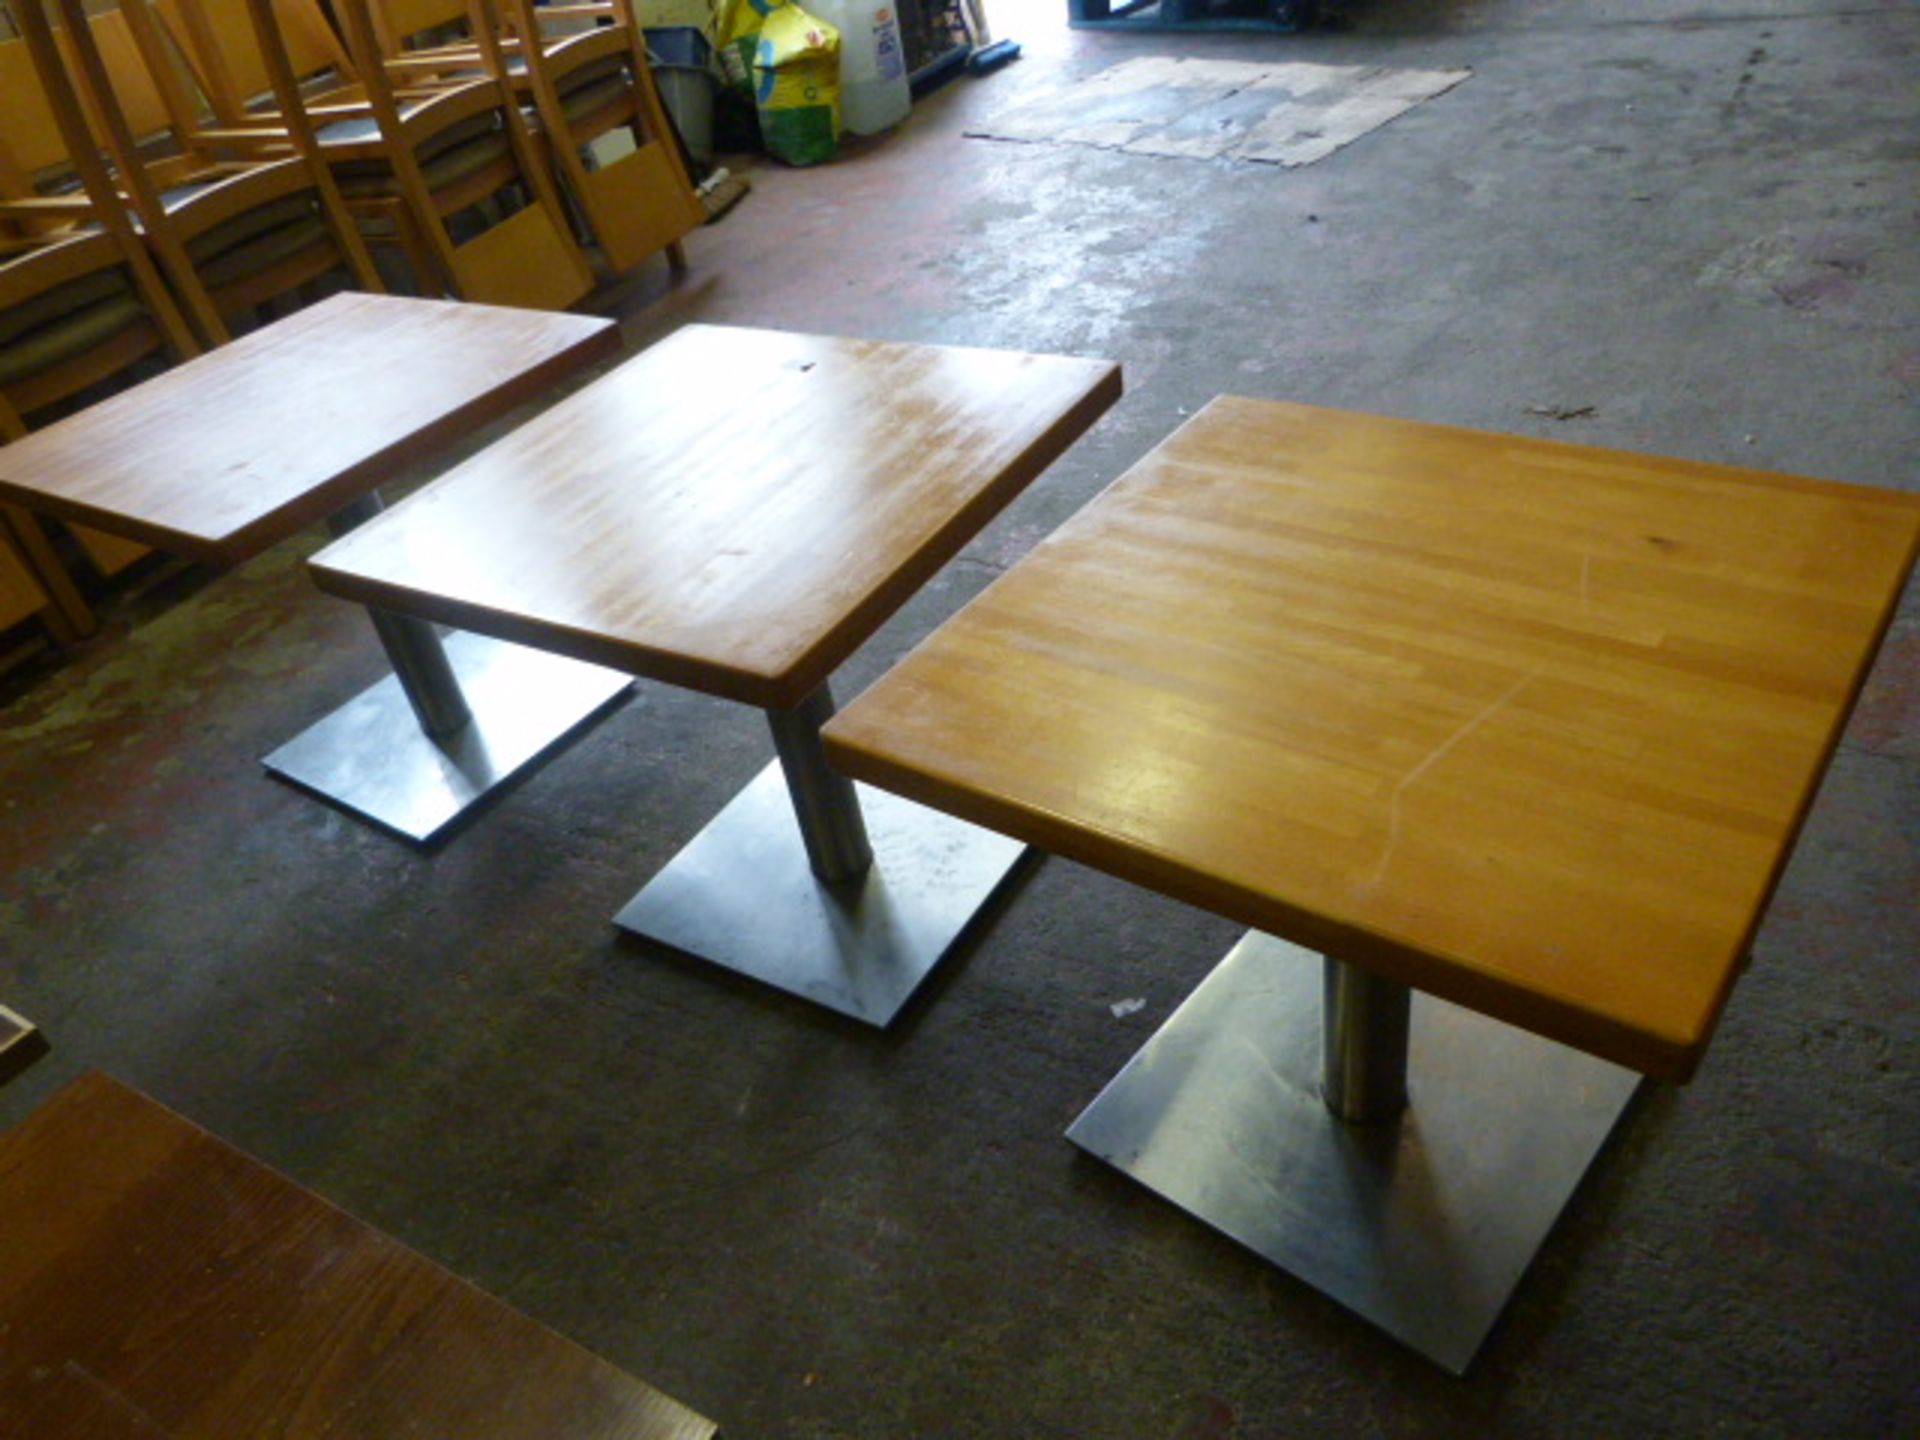 * Three Single Pedestal Tables 60x60x55cm (Holes may need drilling to fit, no fittings